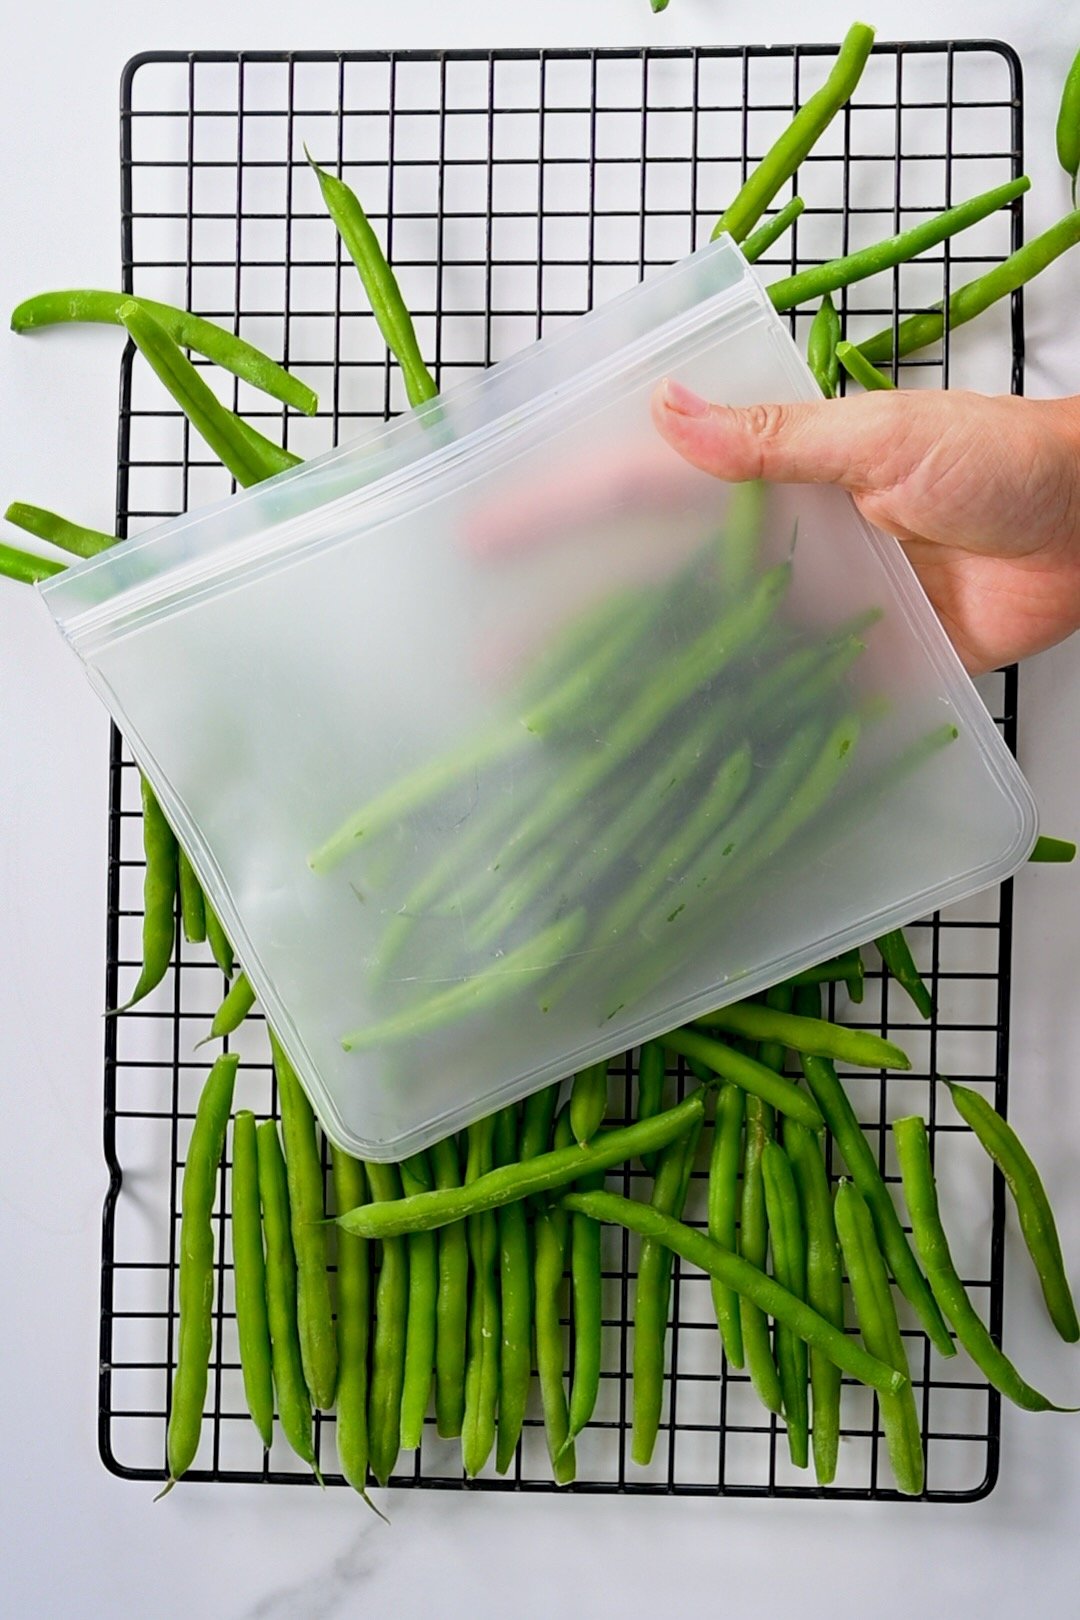 Filling a freezer bag with green beans